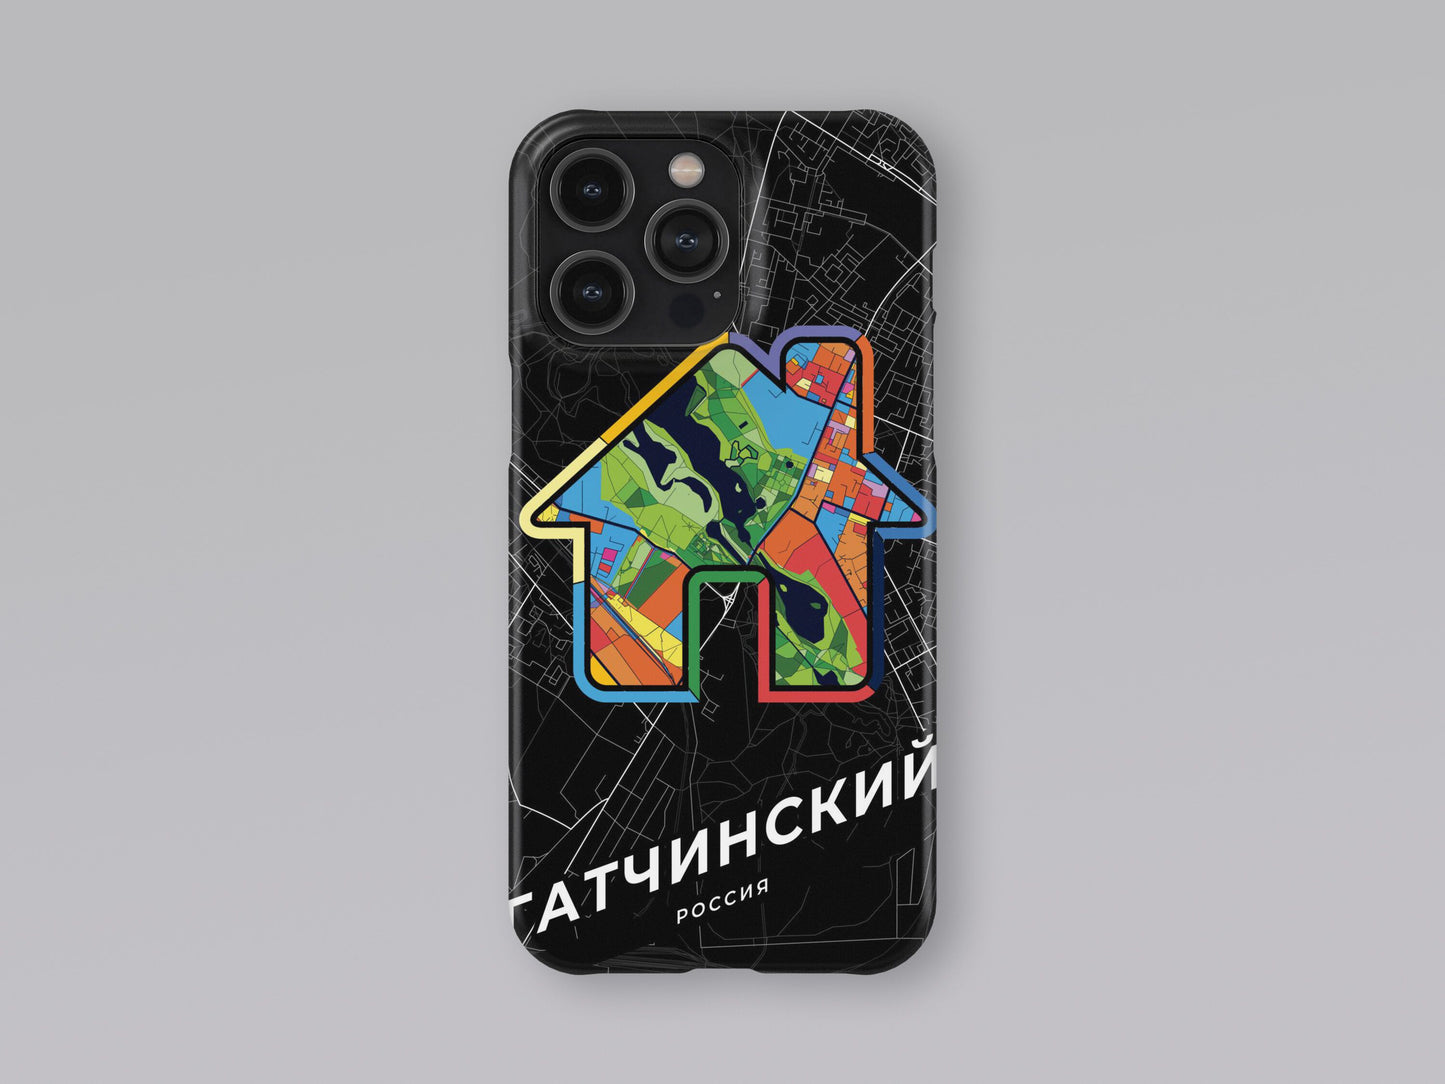 Gatchina Russia slim phone case with colorful icon. Birthday, wedding or housewarming gift. Couple match cases. 3